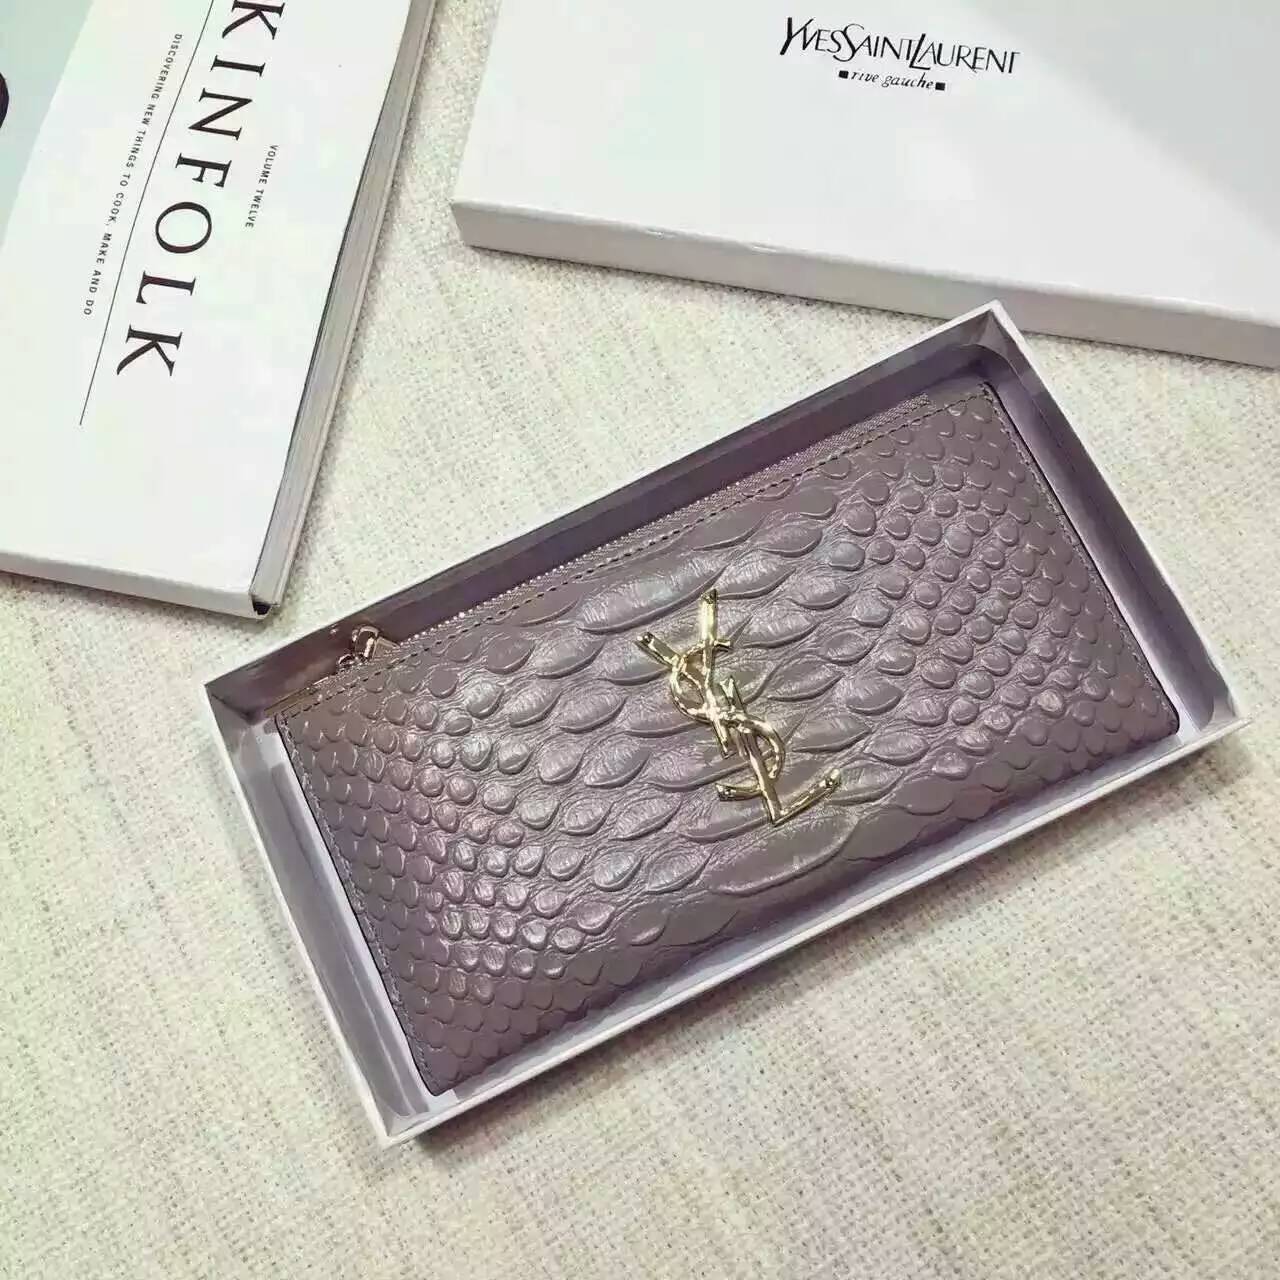 Limited Edition!2016 New Saint Laurent Small Leather Goods Cheap Sale-Saint Laurent Zippy Wallet in Grey Python Embossed Leather